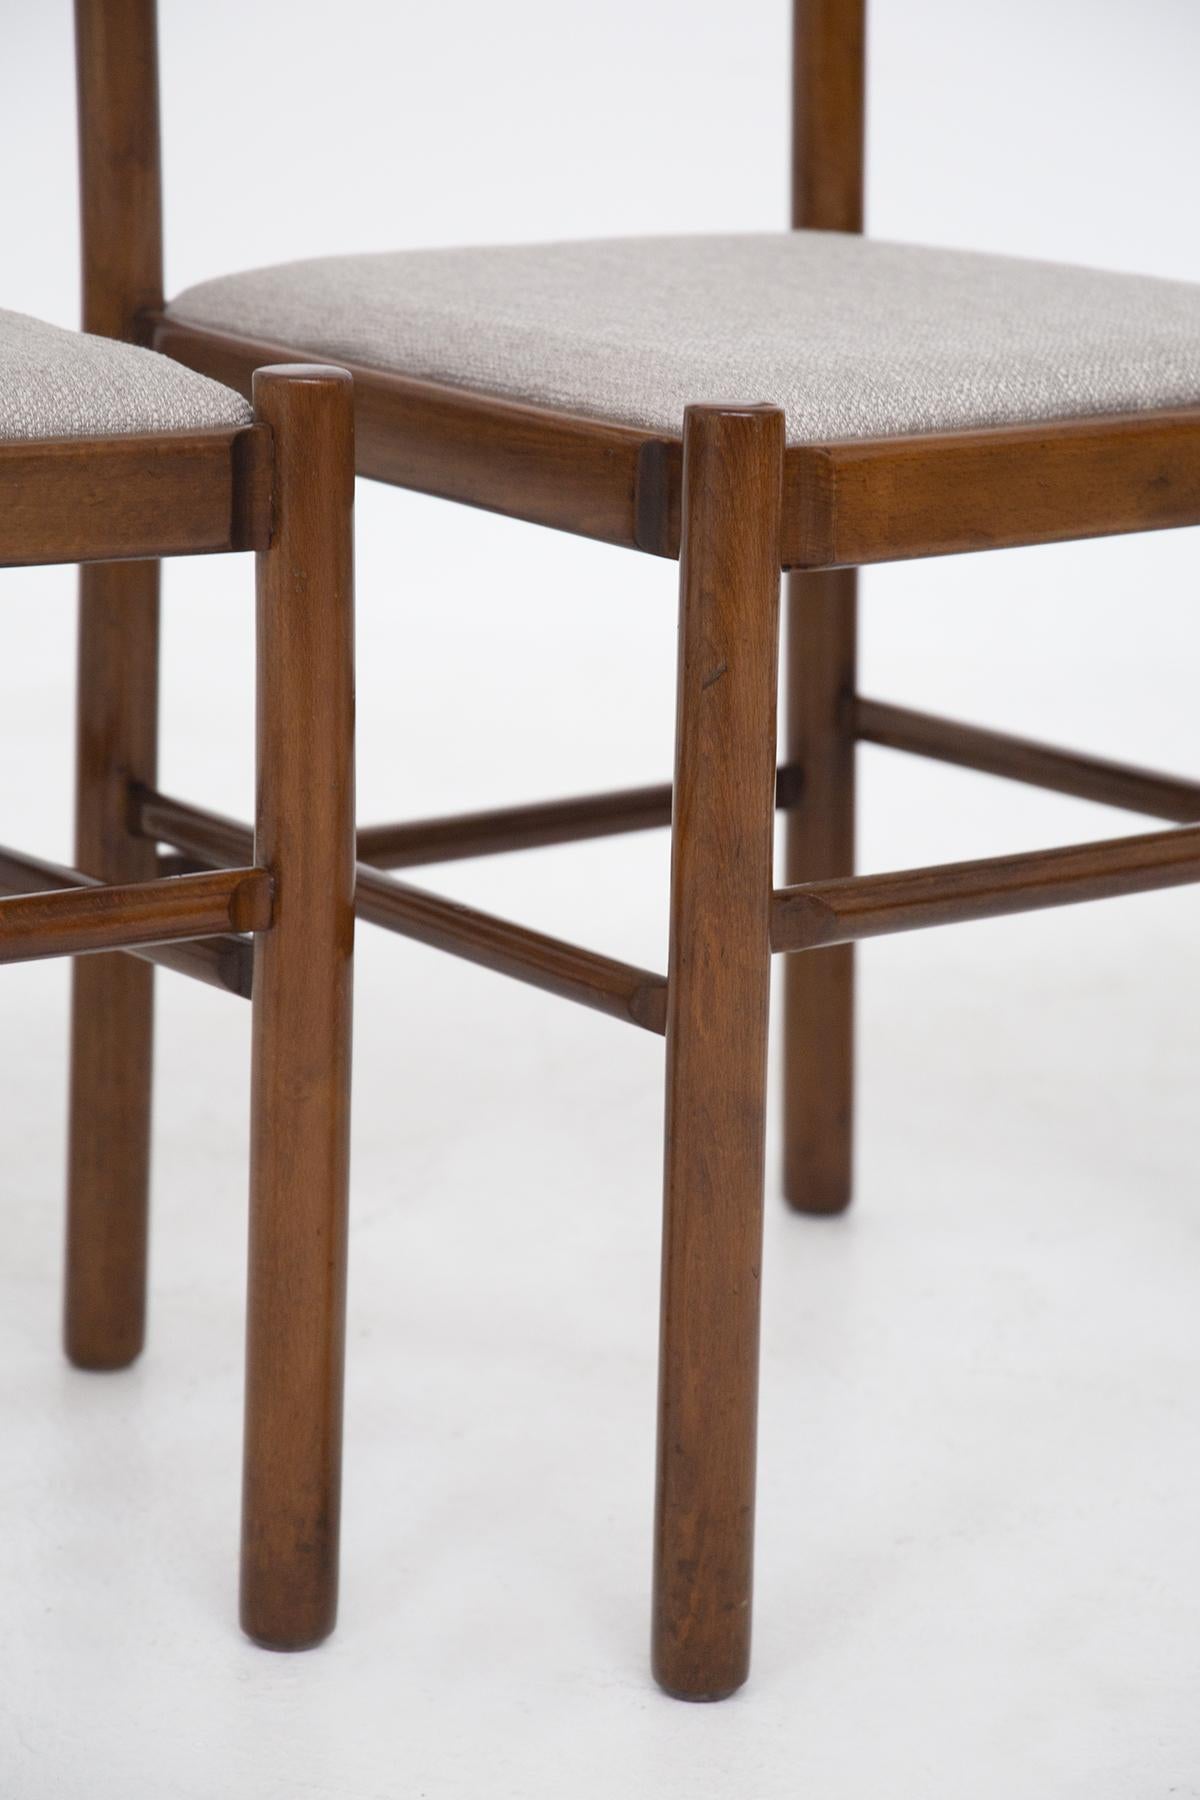 Mid-20th Century Set of Four Italian Chairs in Beige Cotton Fabric